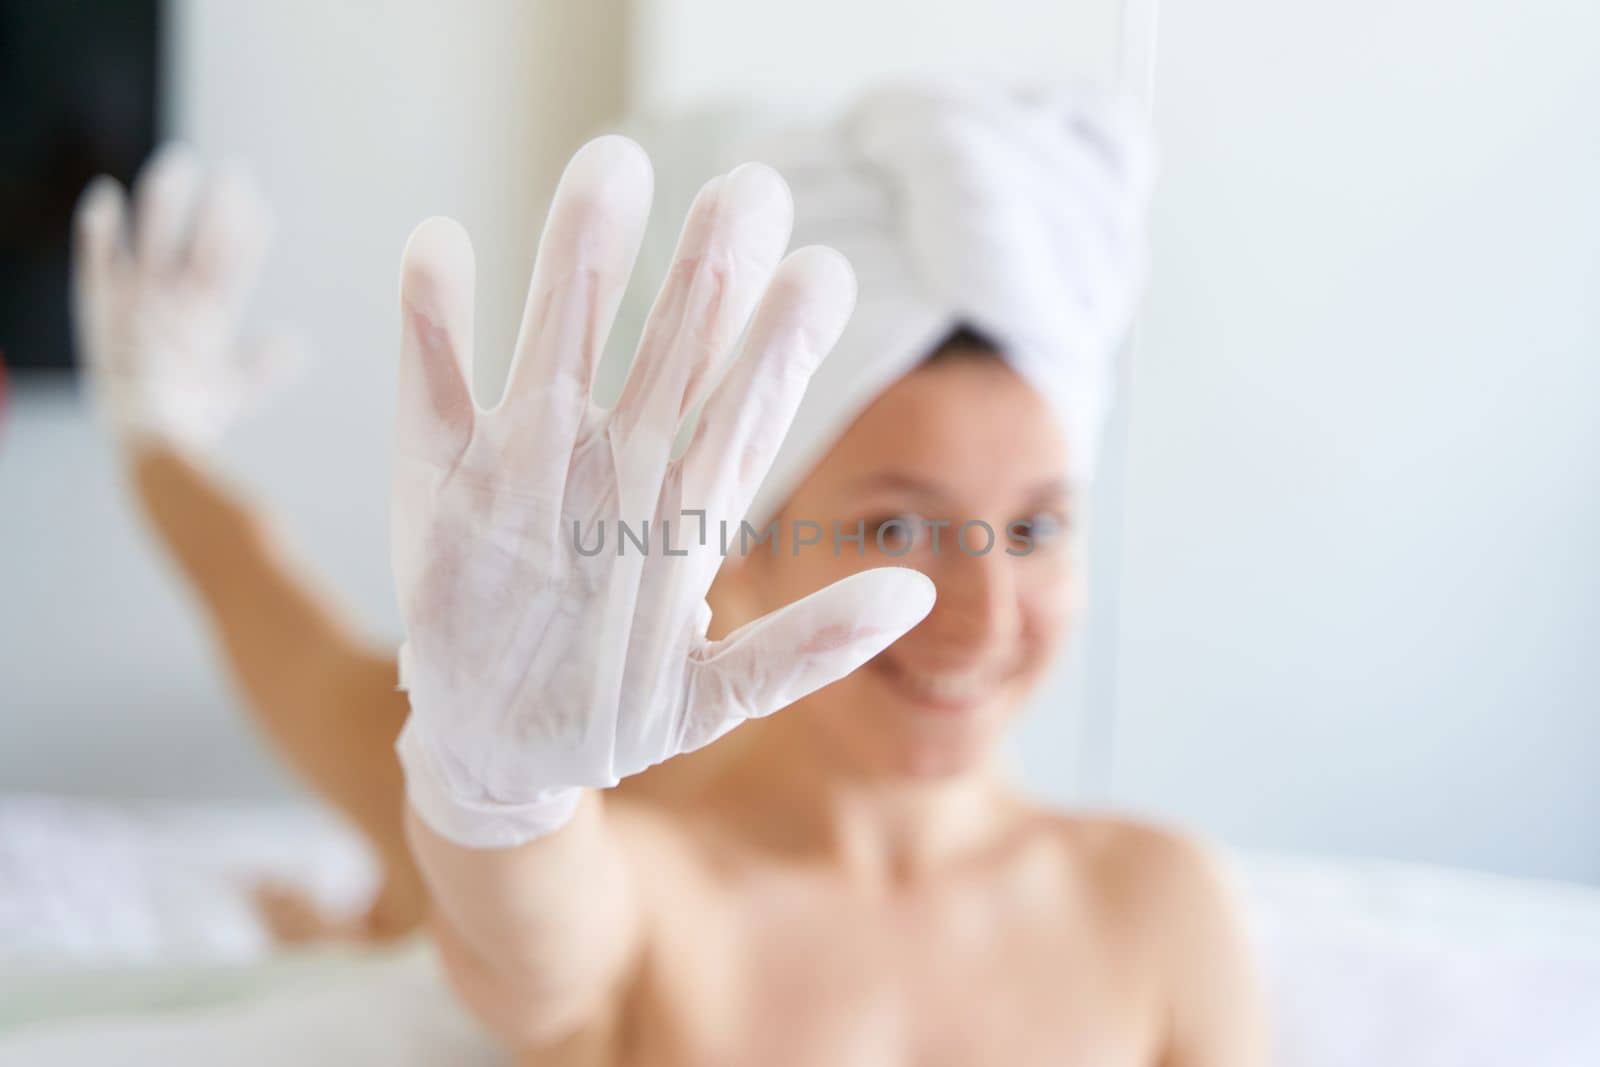 After a shower, a girl wrapped in a towel uses cosmetic gloves to moisturize the skin of her hands. Cosmetic trends for body care at home.